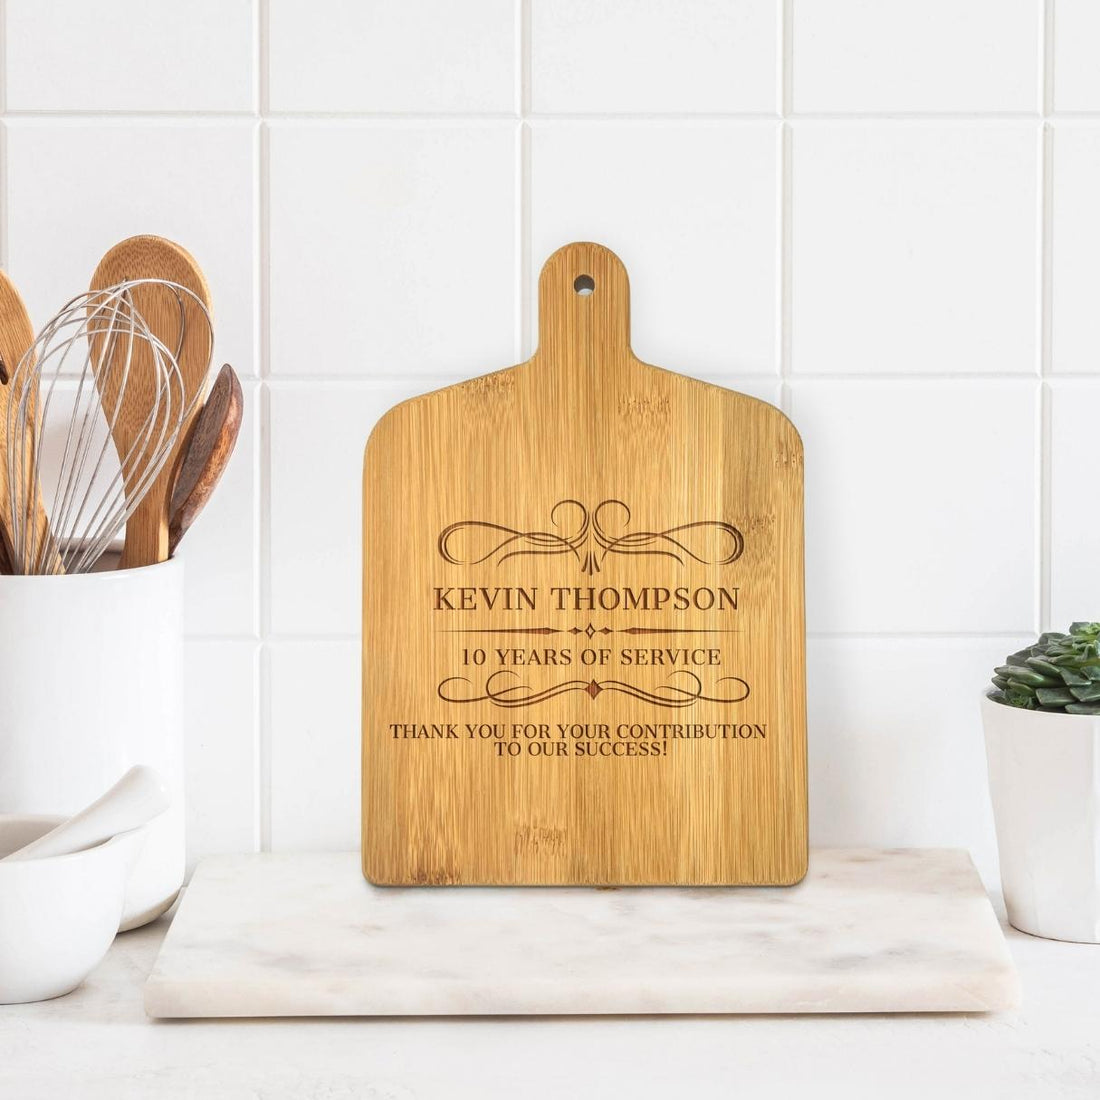 Personalised Solid Wooden Serving Cheese Handle Tray Cutting Board, Engraved Charcuterie Platter, Custom Housewarming, Corporate, Mother's Gift